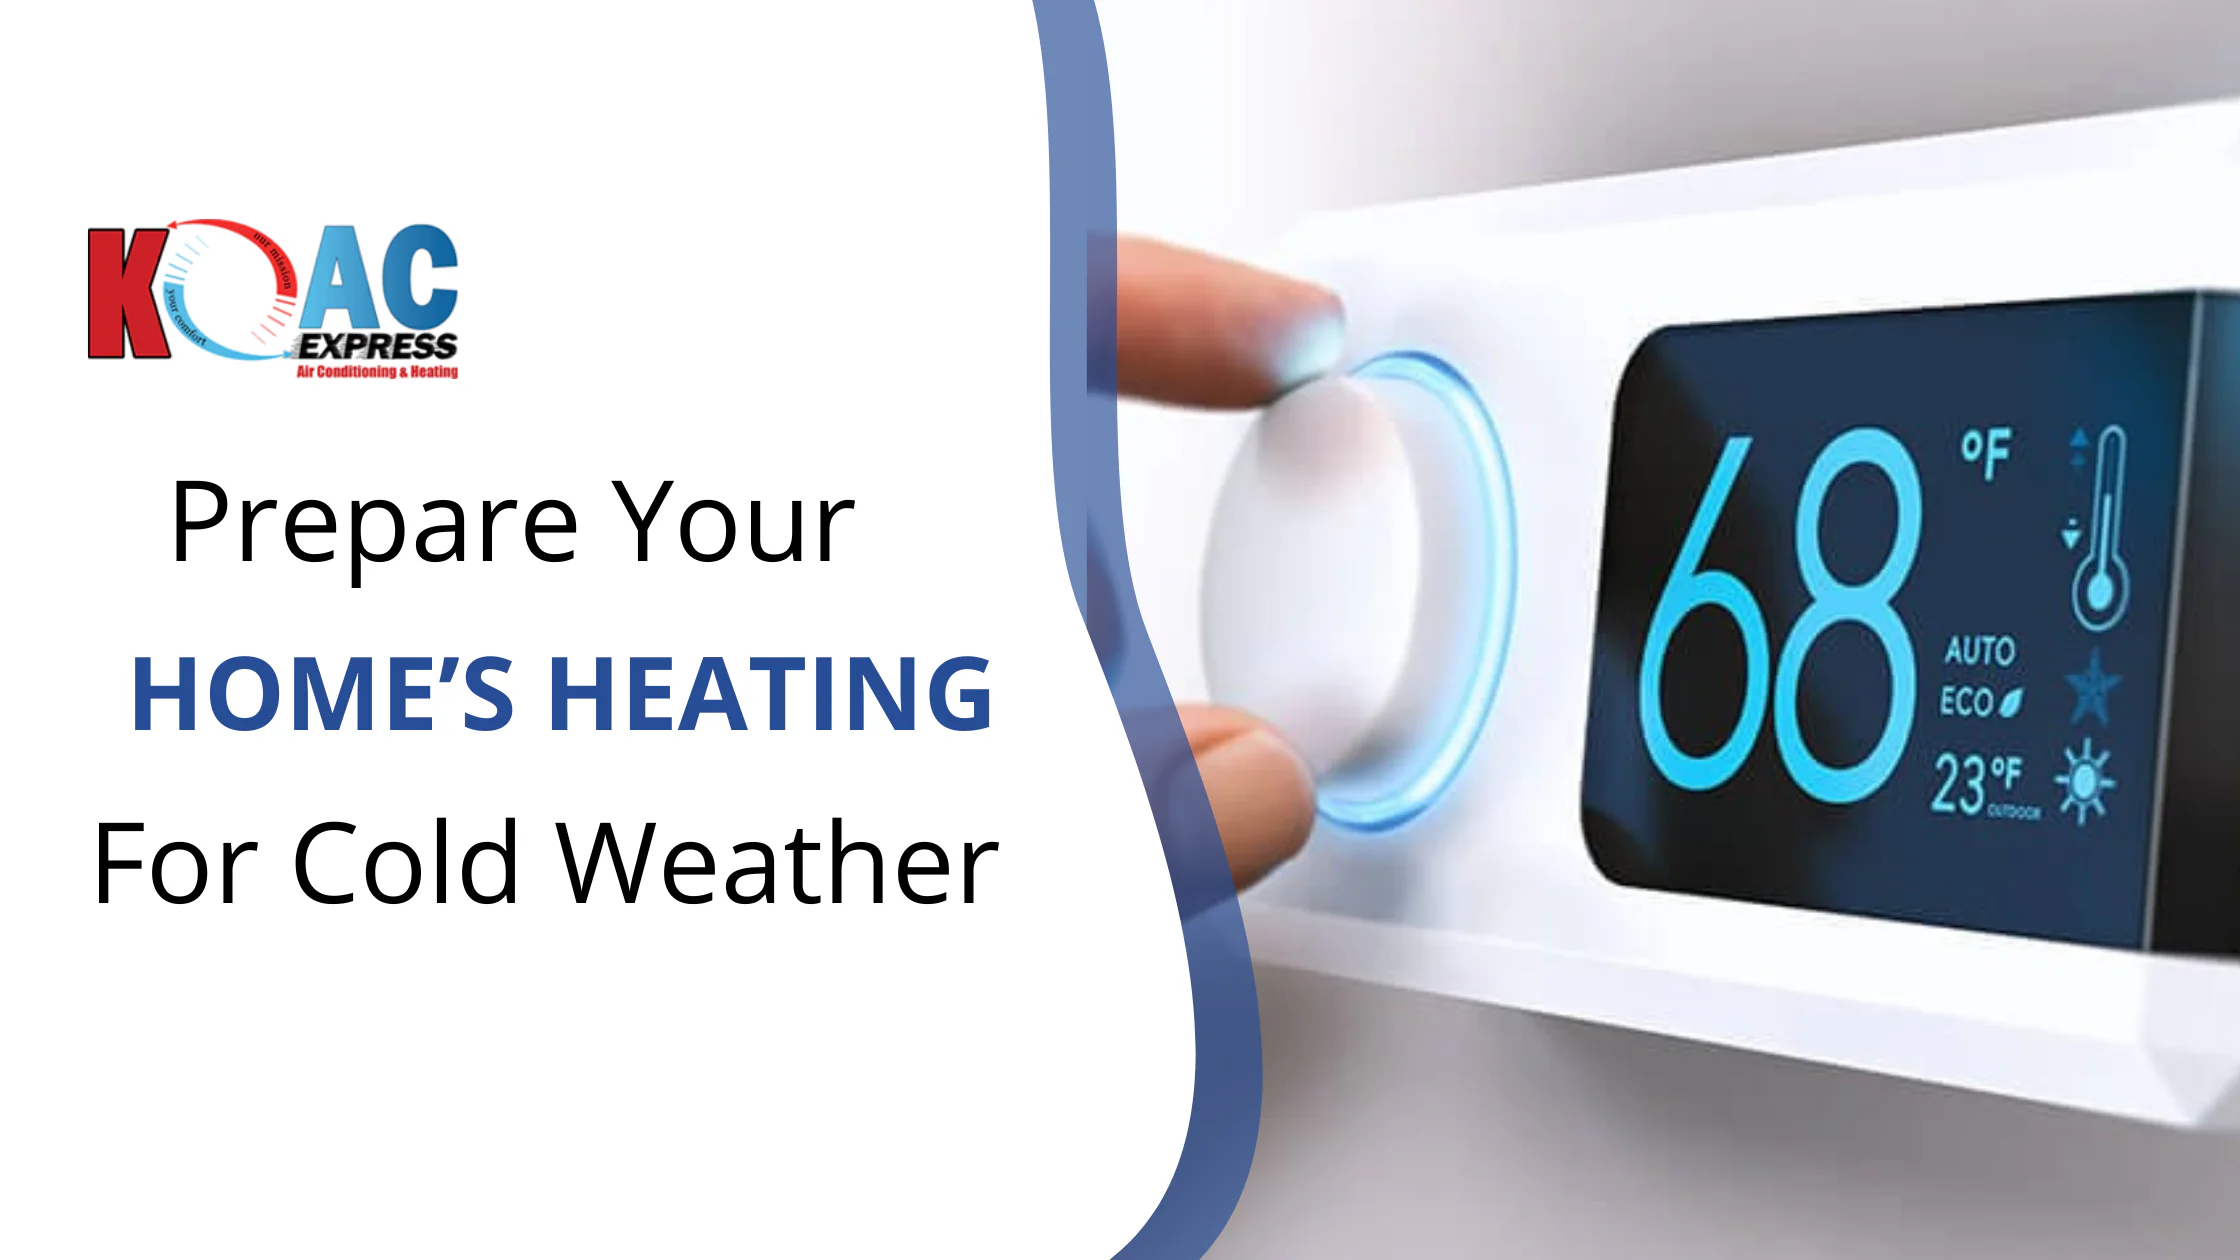 Prepare Your Home’s Heating for Cold Weather